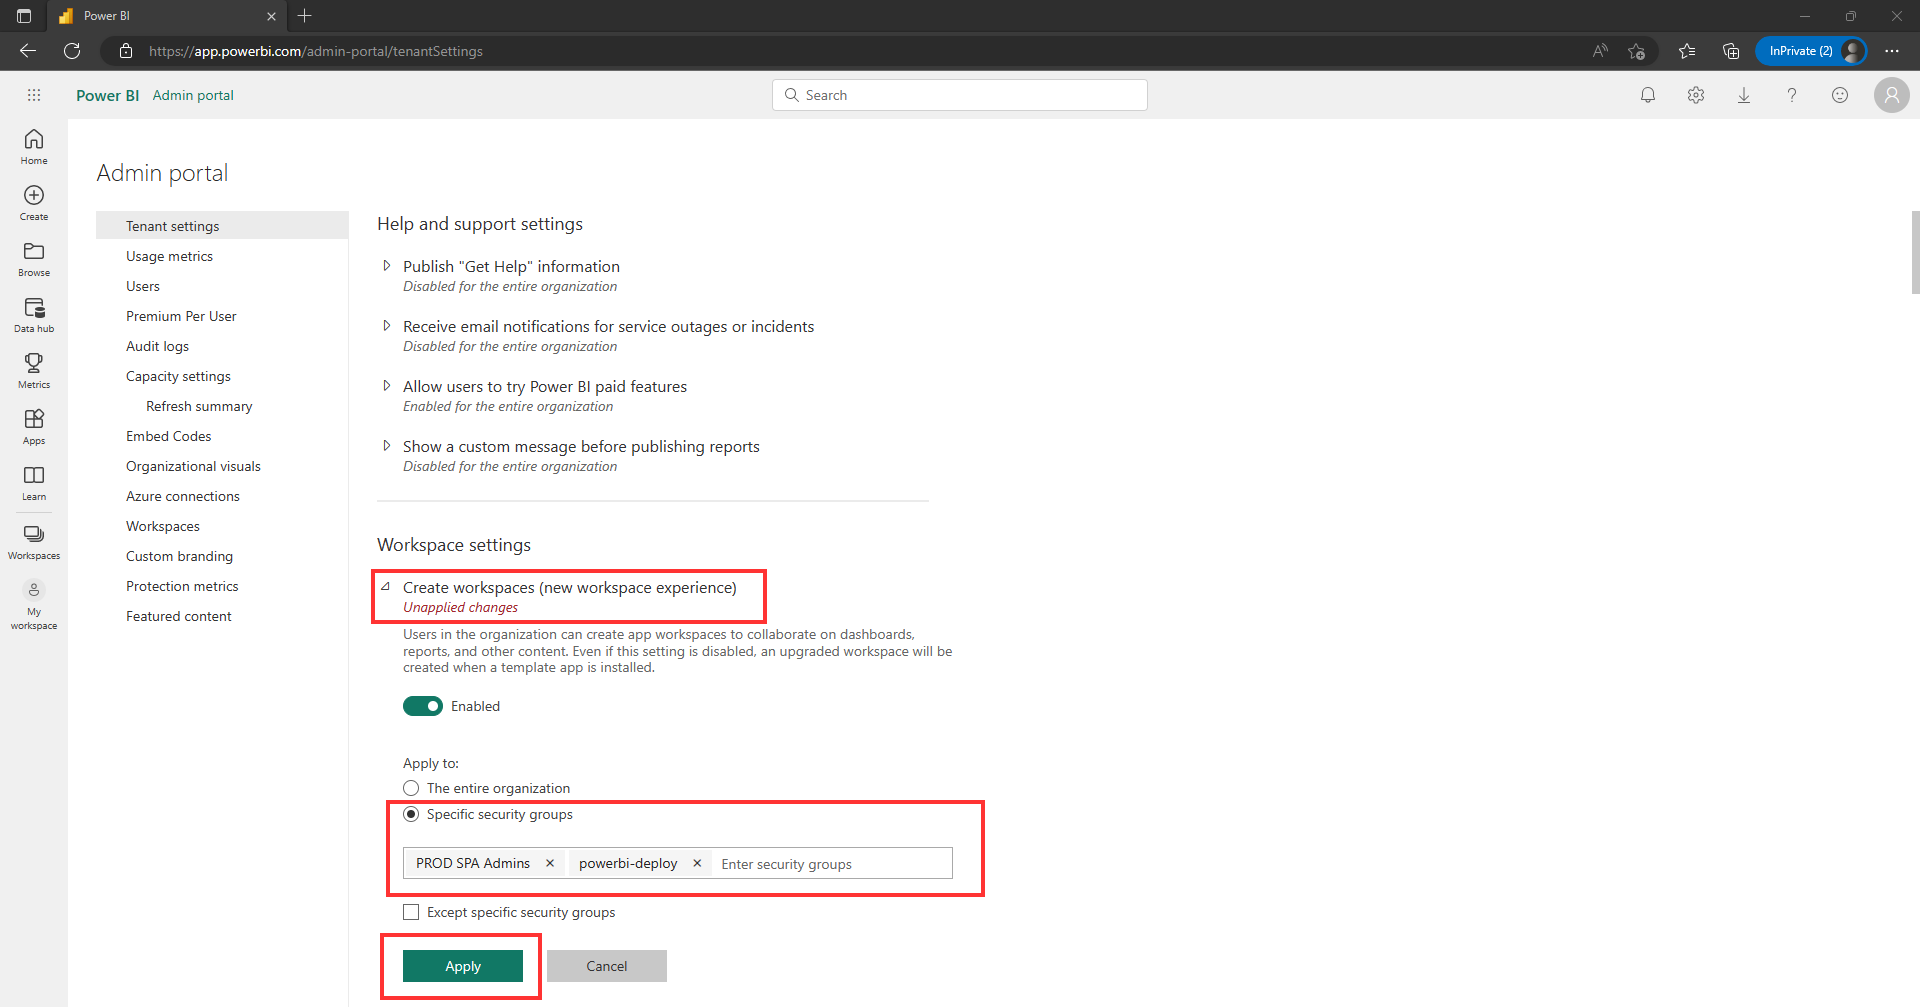 The image shows how to enable workspace for a specific security group.